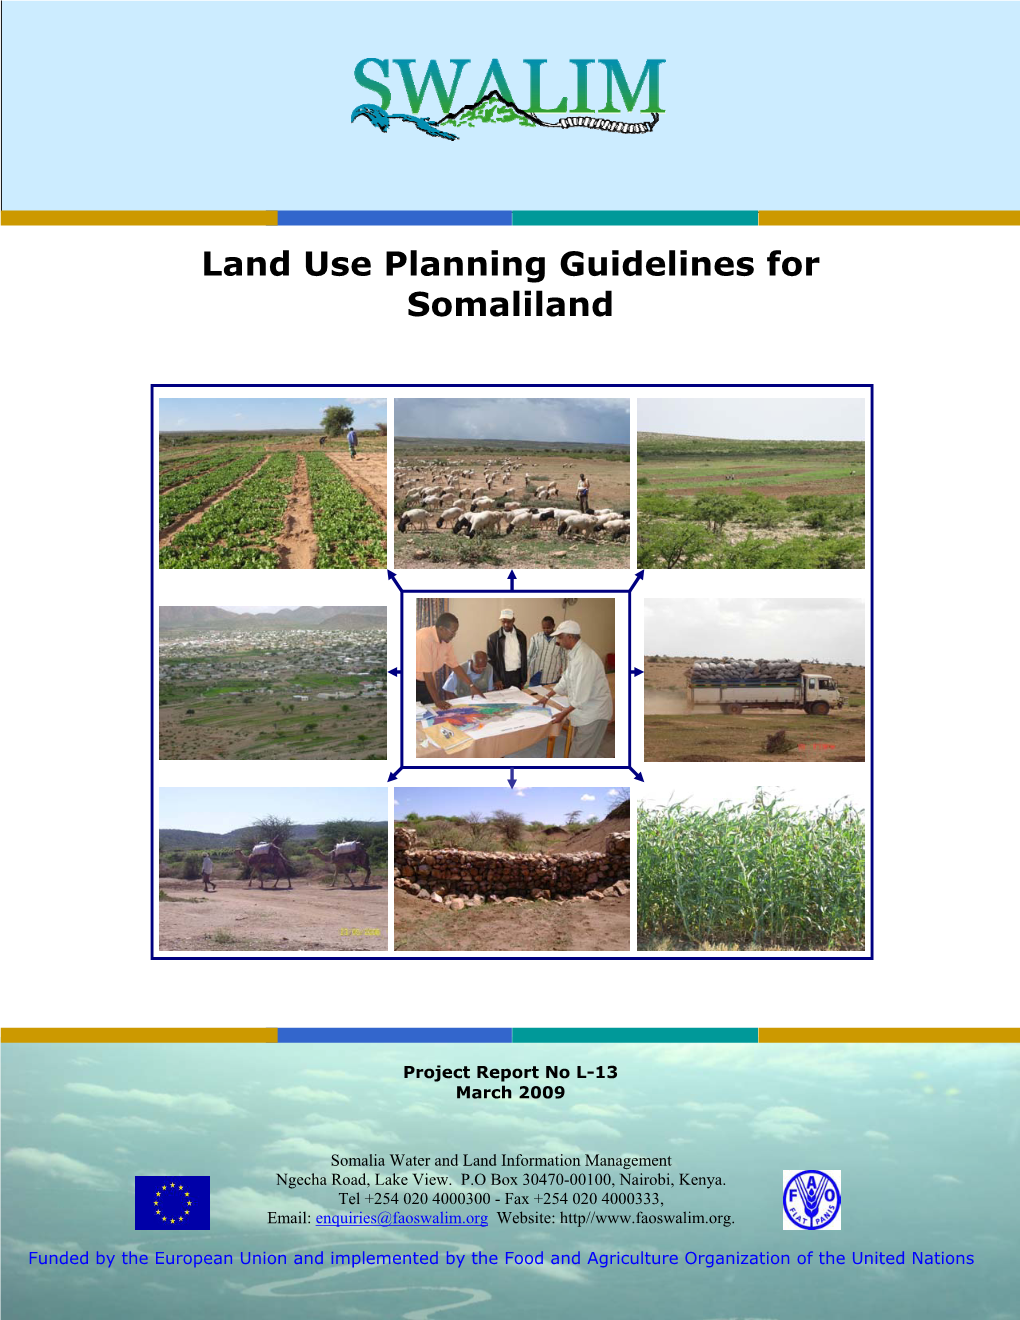 Land Use Planning Guidelines for Somaliland 2009